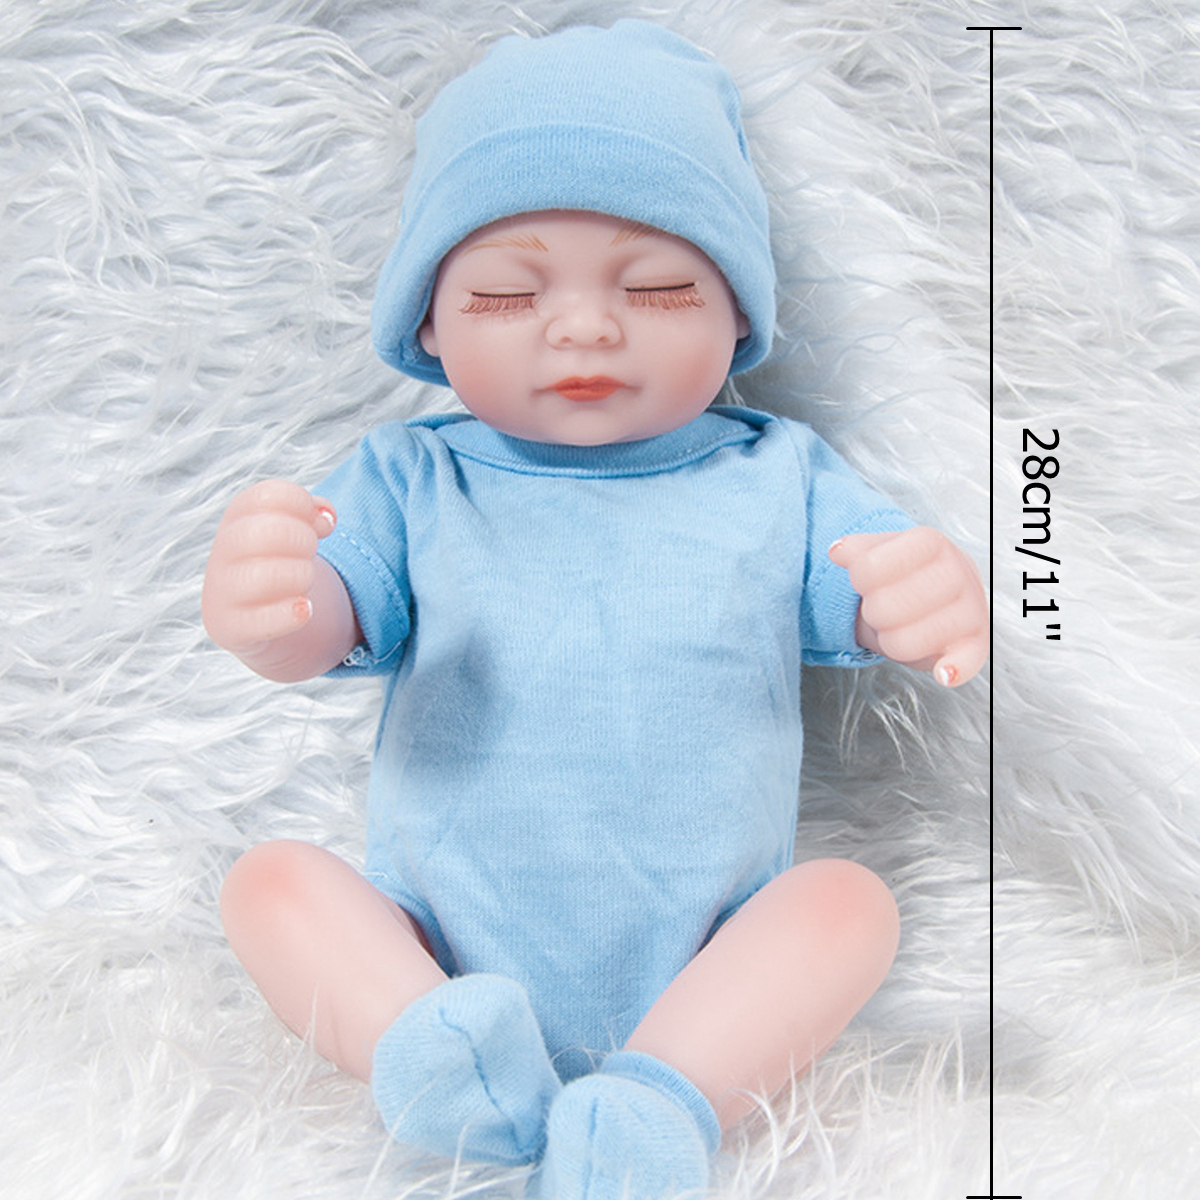 28CM-Soft-Silicone-Realistic-Sleeping-Reborns-Lifelikes-Newborns-Baby-Doll-Toy-with-Moveable-Head-Ar-1891375-12